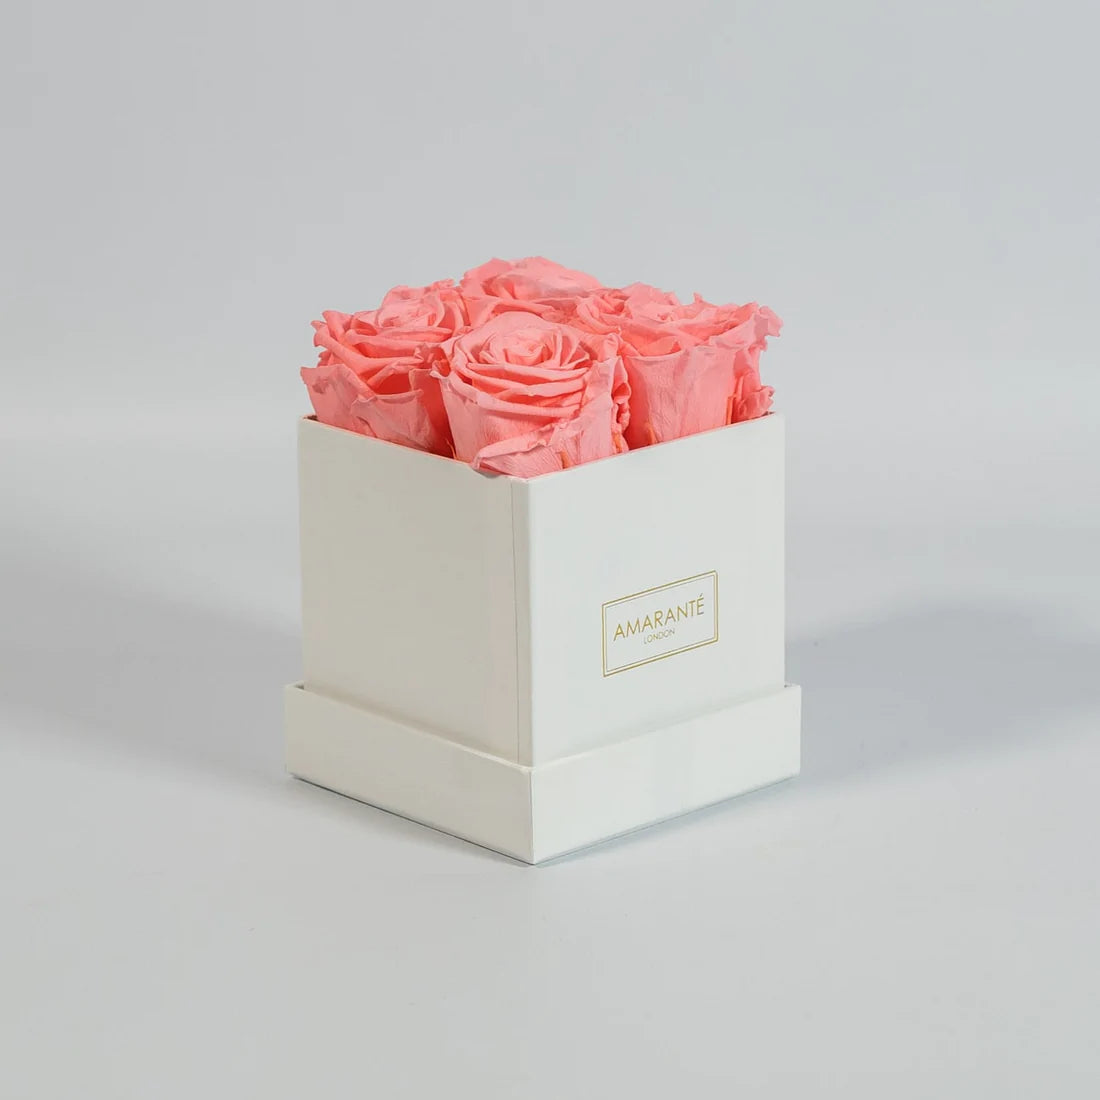 Five Rose Boxes For Your Mum on Mother's Day